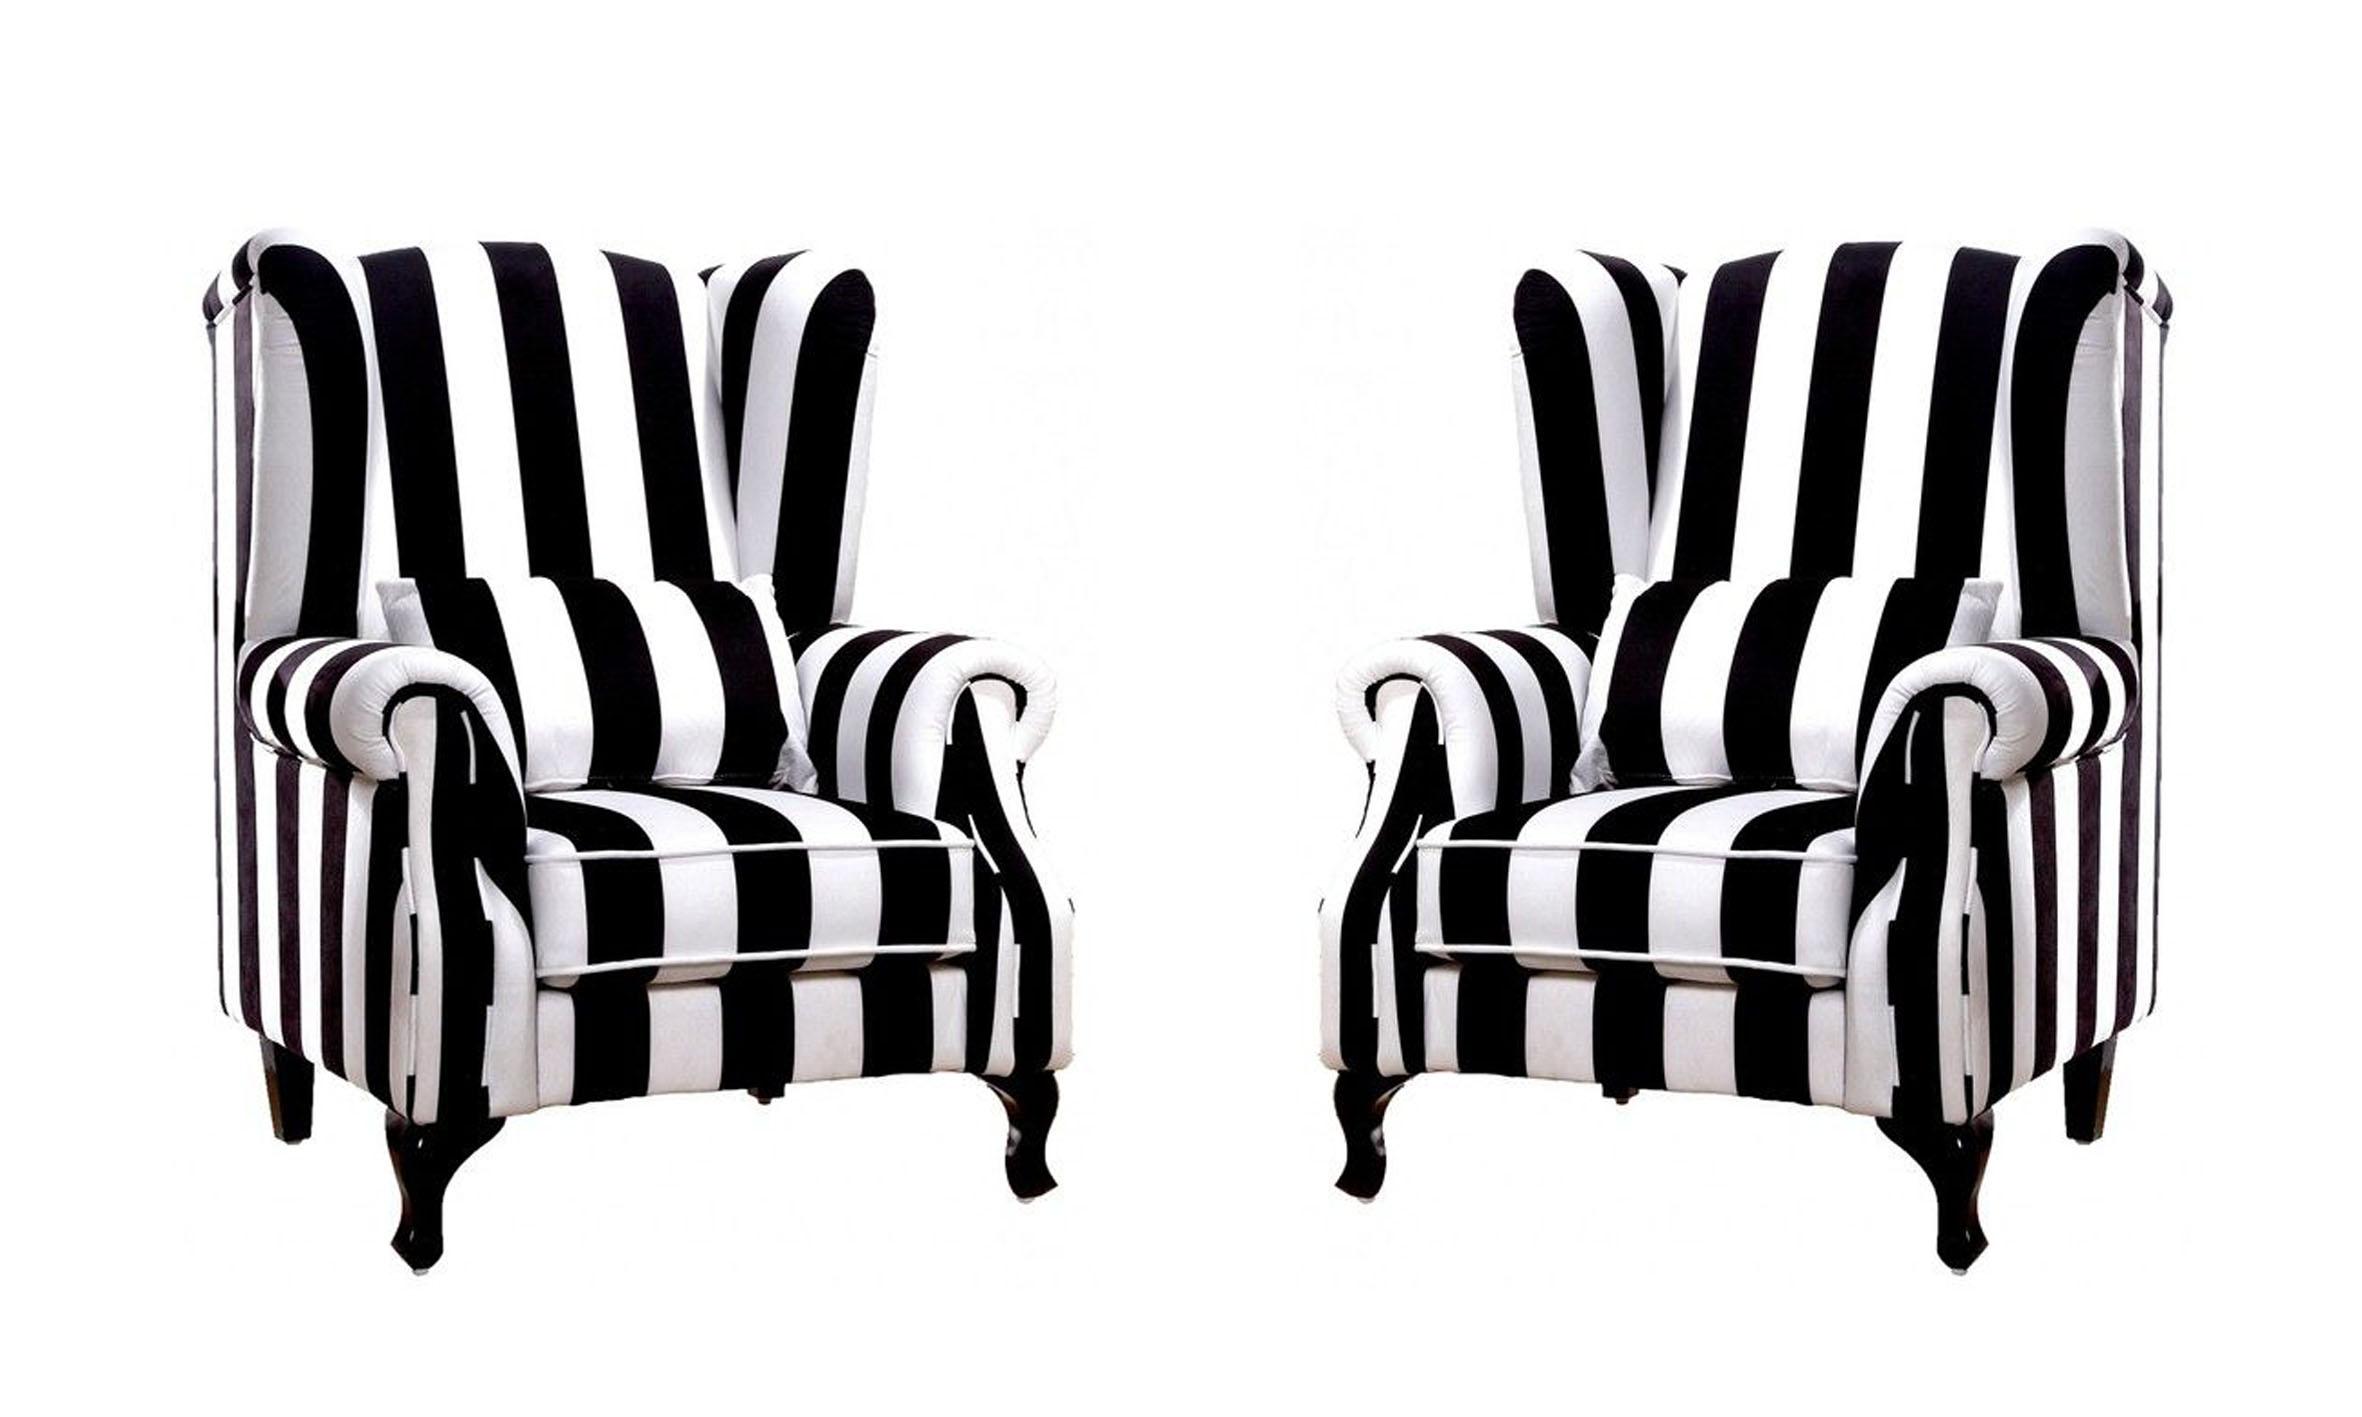 Traditional Arm Chairs 43280 43280-Armchair-Set-2 in Black, White Fabric